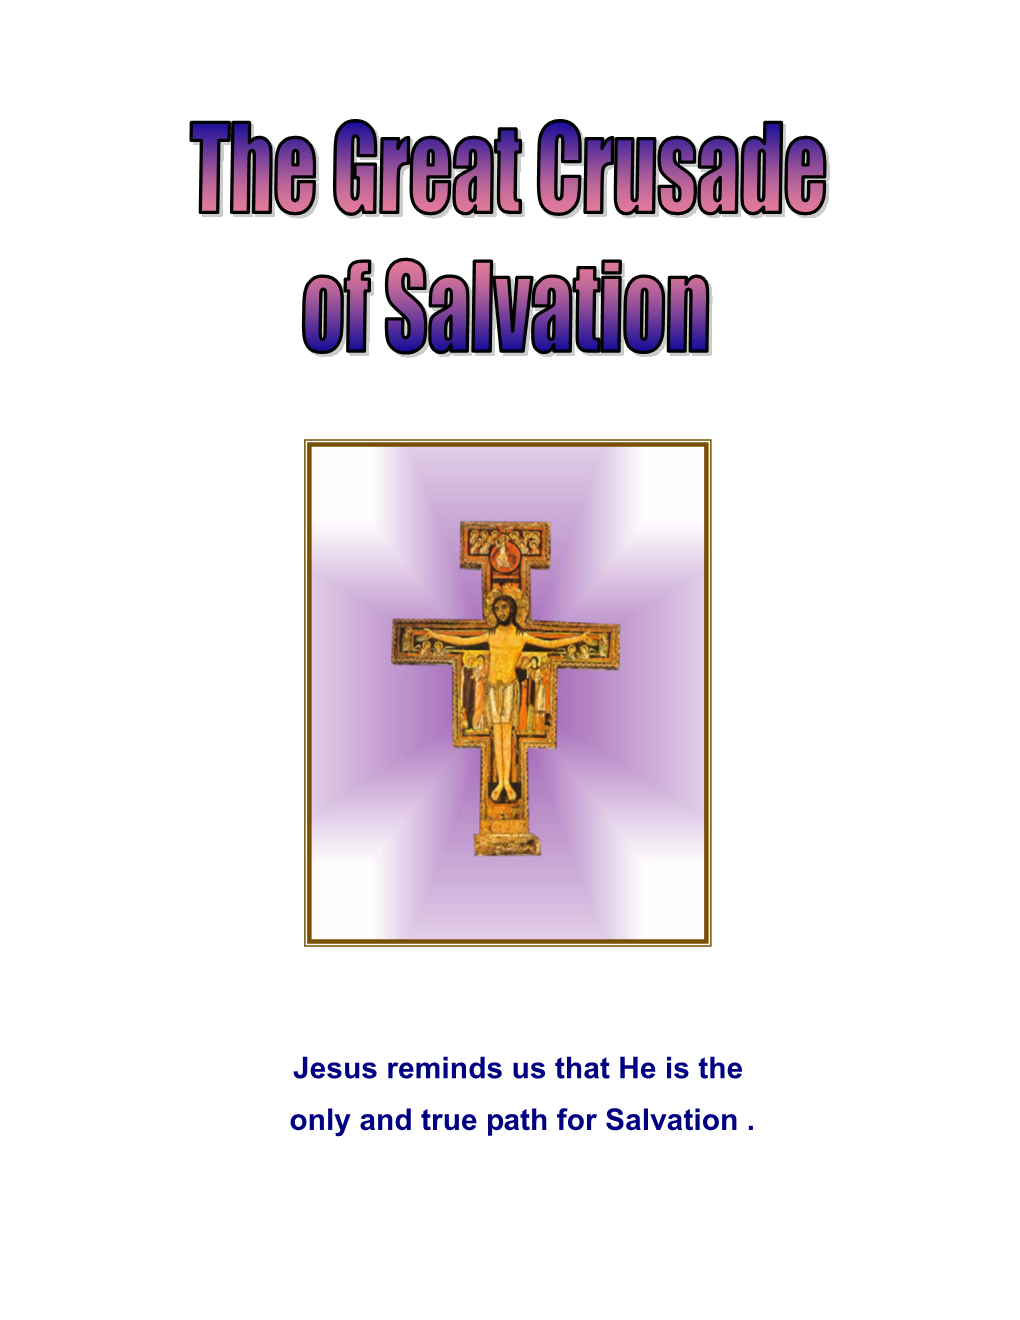 The Great Crusade of Salvation”, Which Is a Plea Addressed to Humanity Requesting Their Return to the Faith